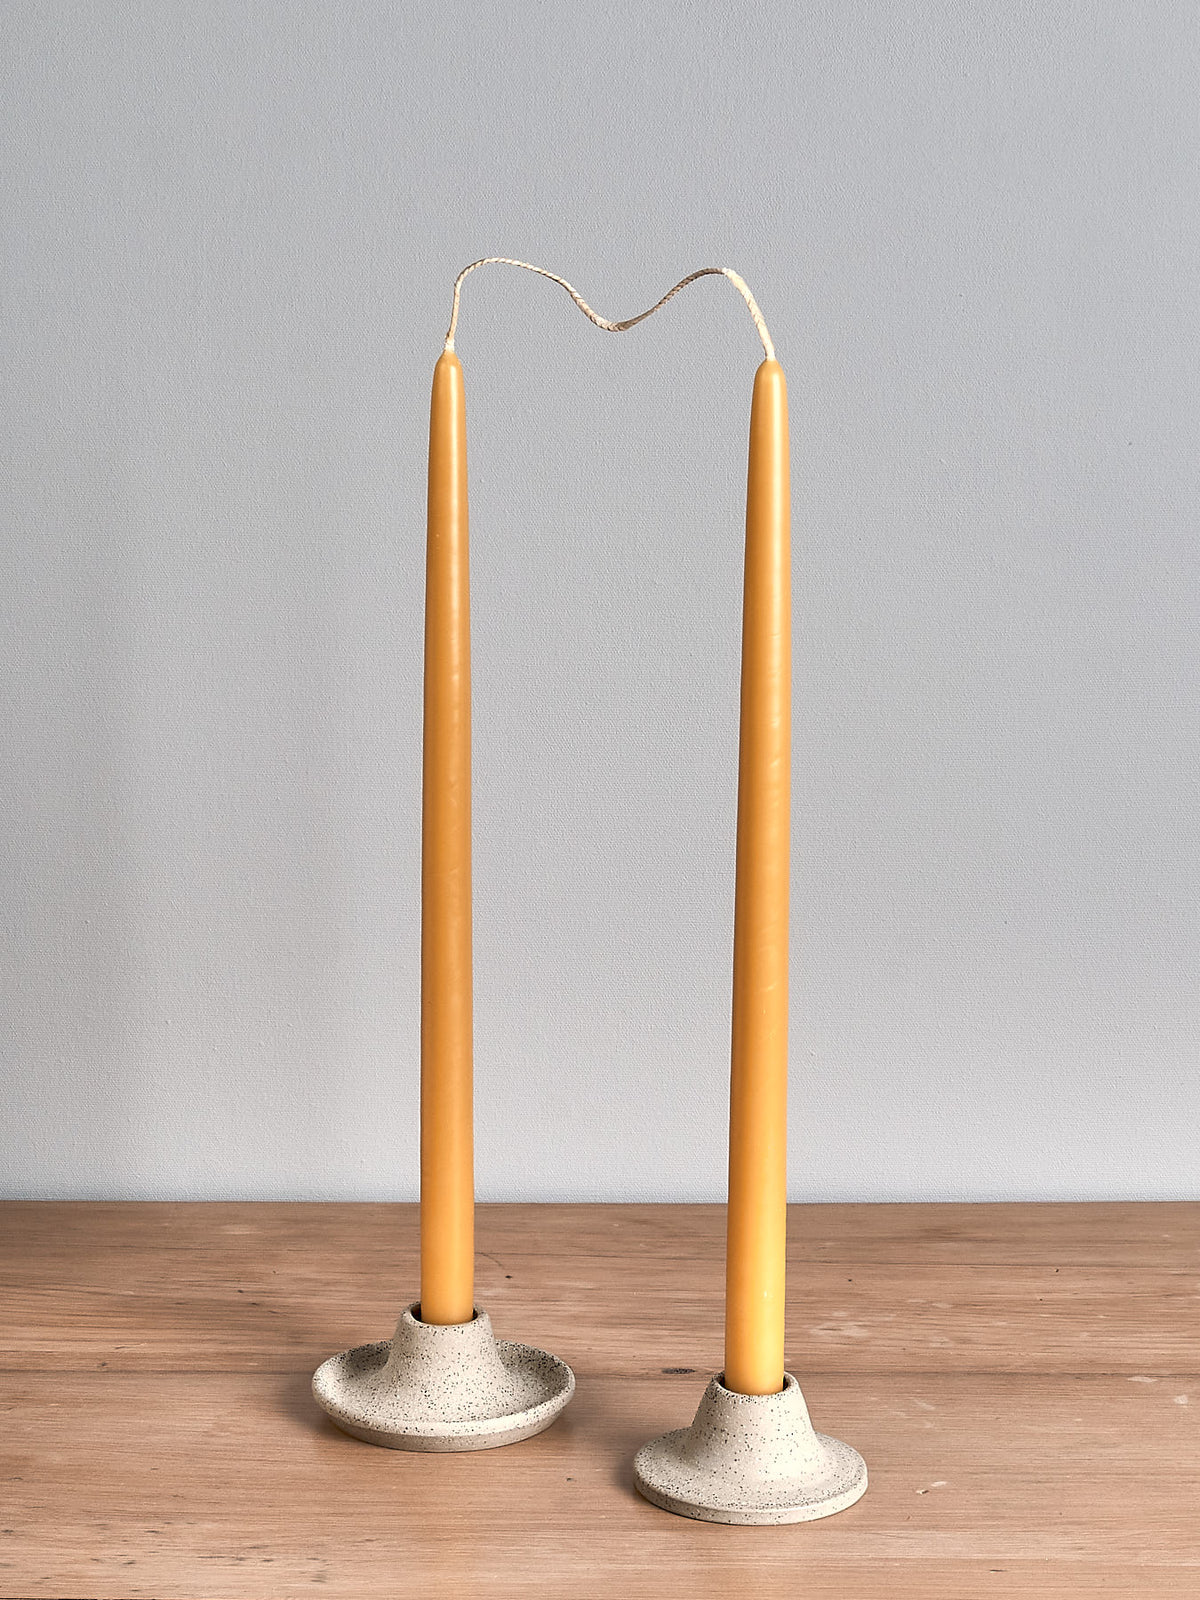 Two Hohepa Candles Dinner Candle Set – Natural candle holders on a wooden table.